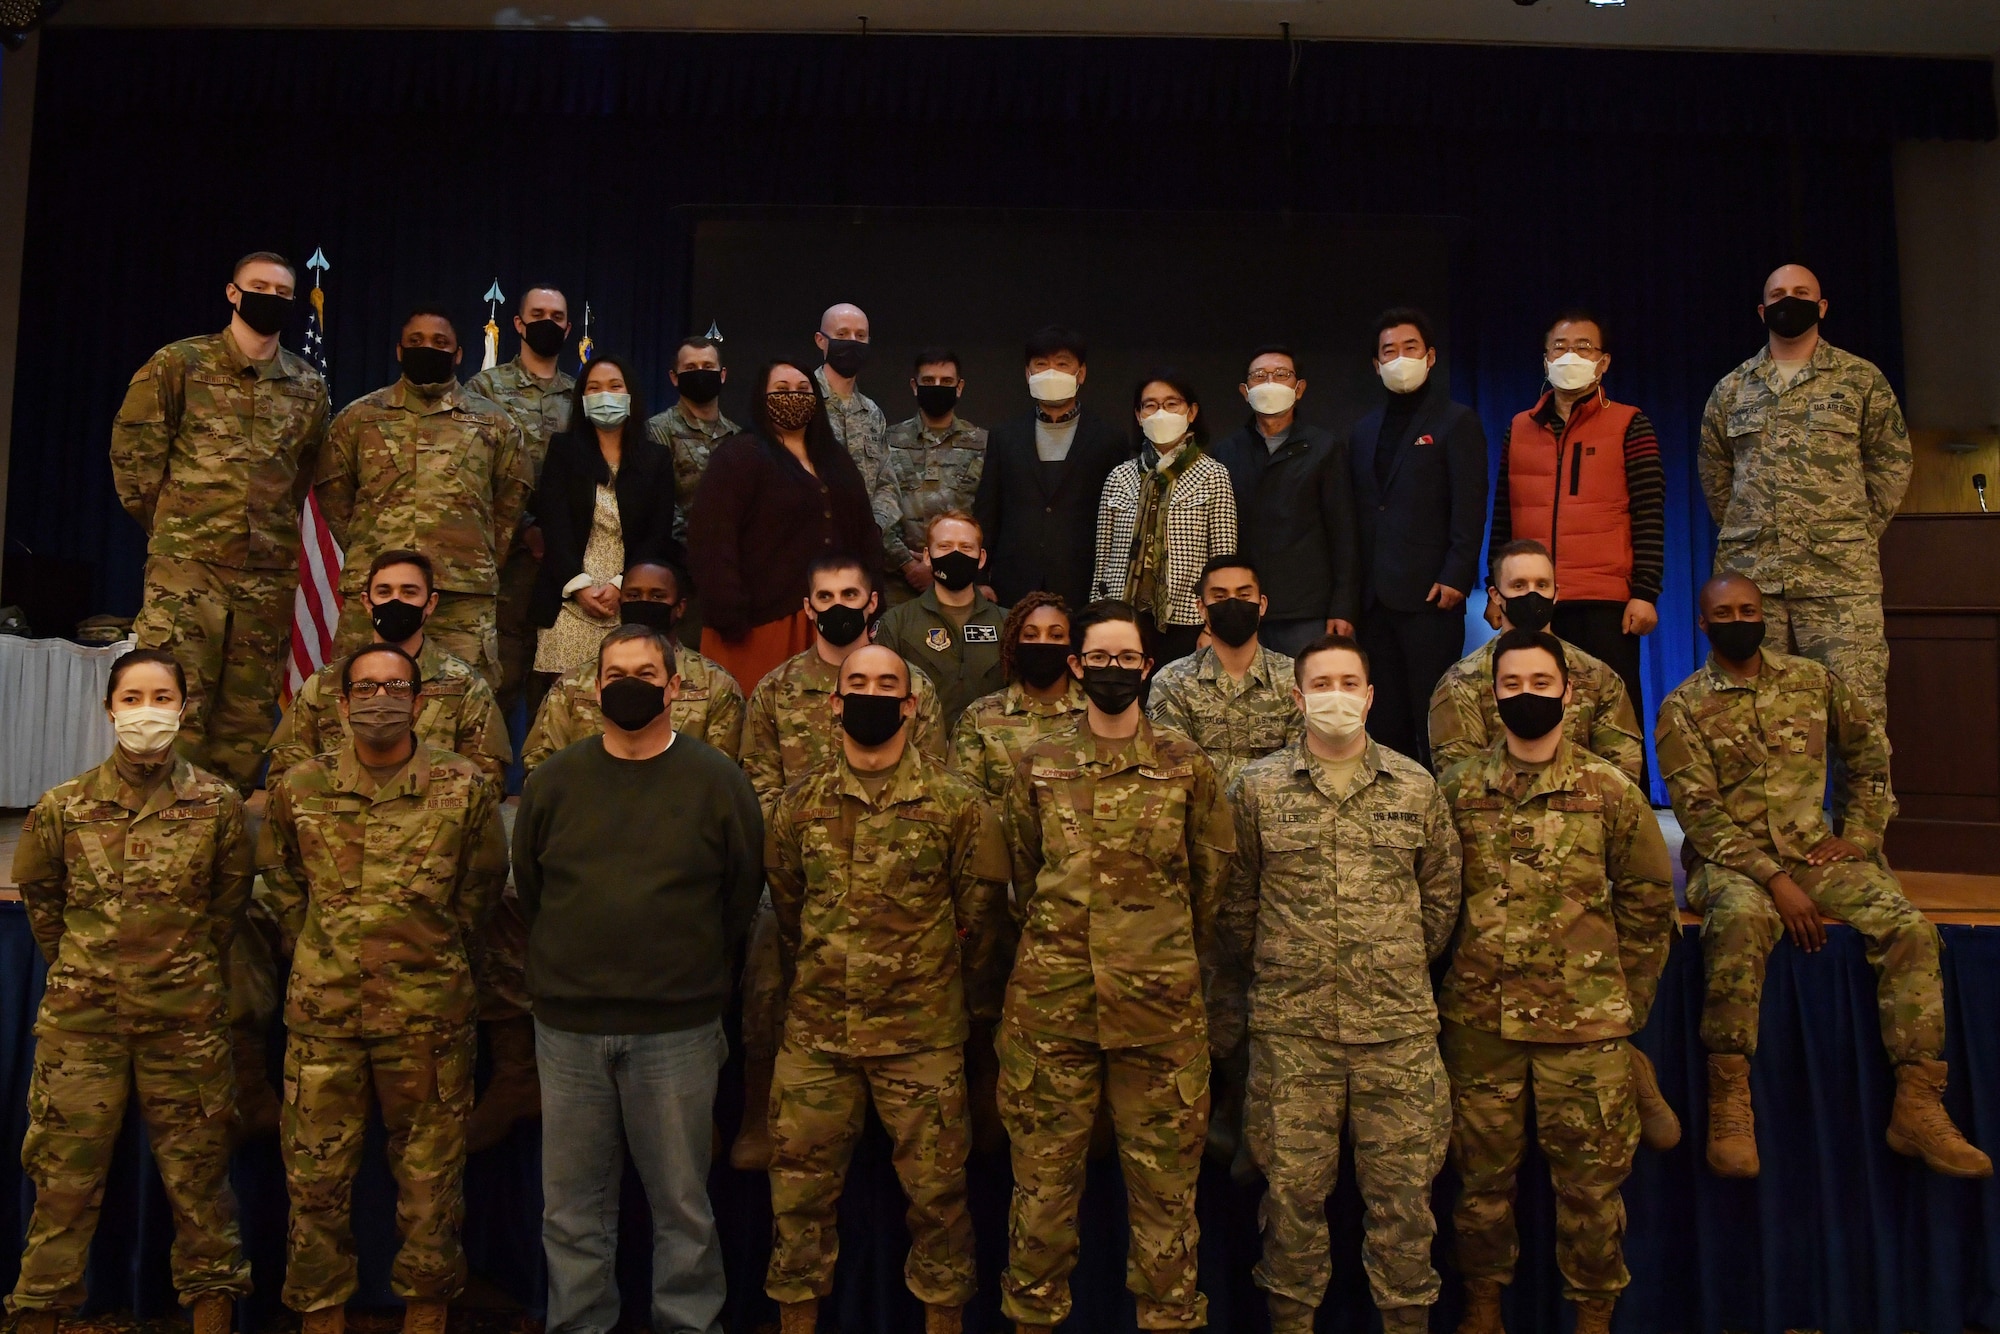 Members of the 18th Intelligence Squadron Detachment 2 pose for a group photo after a transfer ceremony at Osan Air Base, Republic of Korea, Nov. 5, 2020. The ceremony was held to mark the deactivation of the 18th and activation of the 73rd Intelligence, Surveillance and Reconnaissance Squadron detachment 2 as part of the U.S. Space Force. (U.S. Air Force photo by Senior Airman Noah Sudolcan)